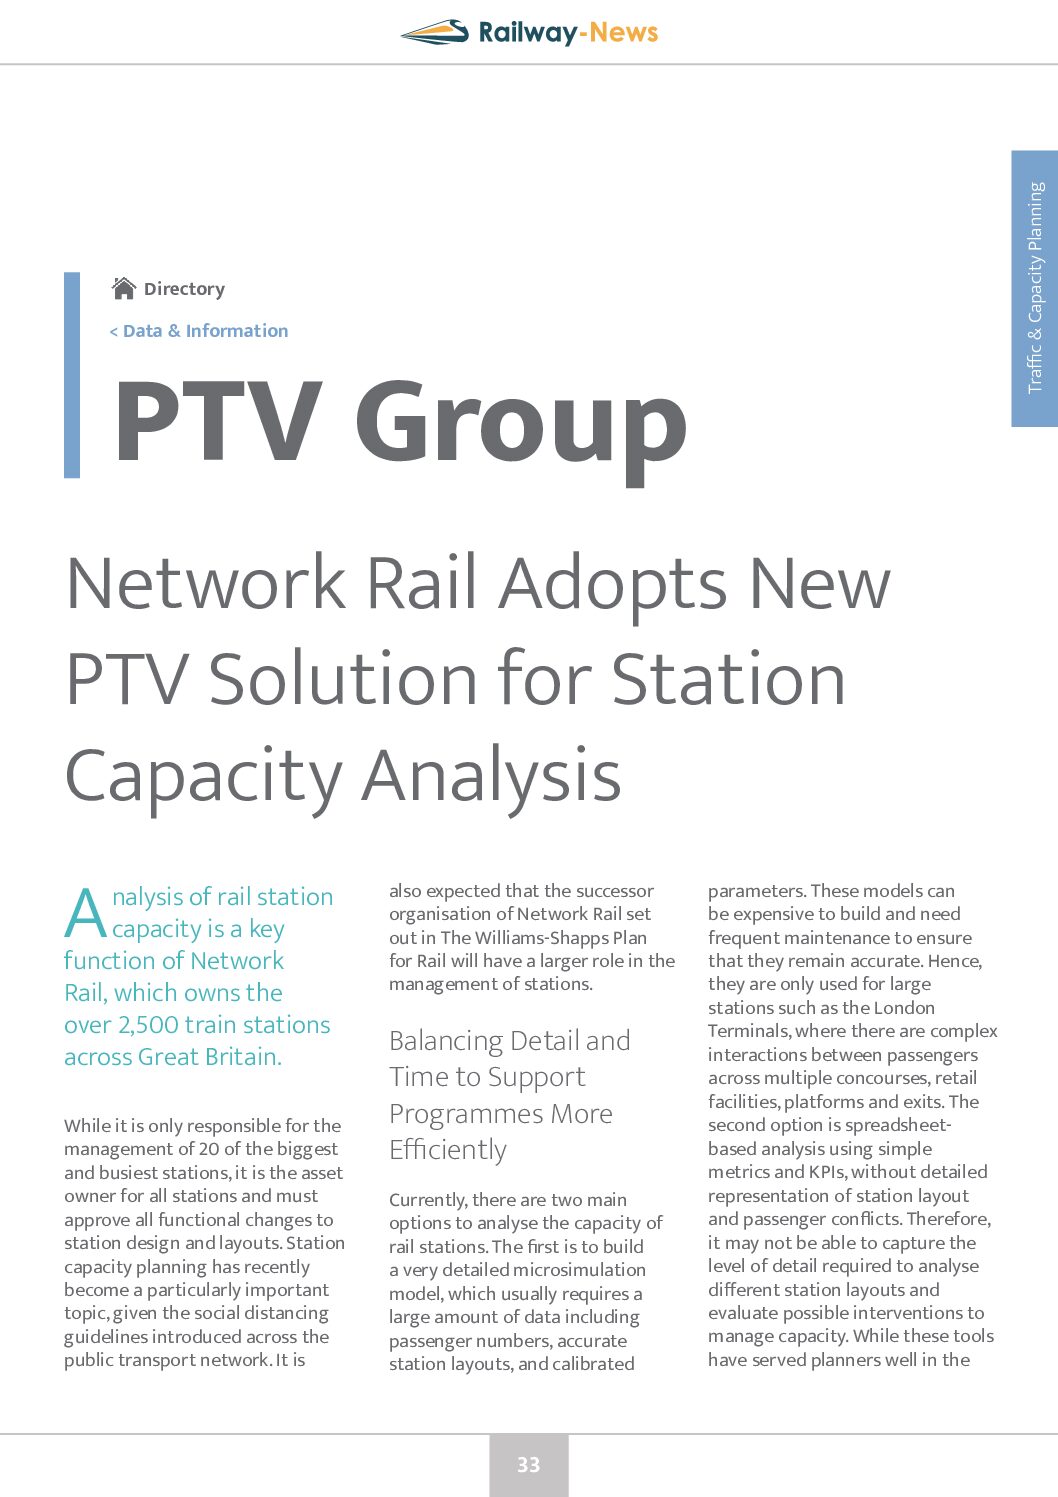 Network Rail Adopts New PTV Solution for Station Capacity Analysis